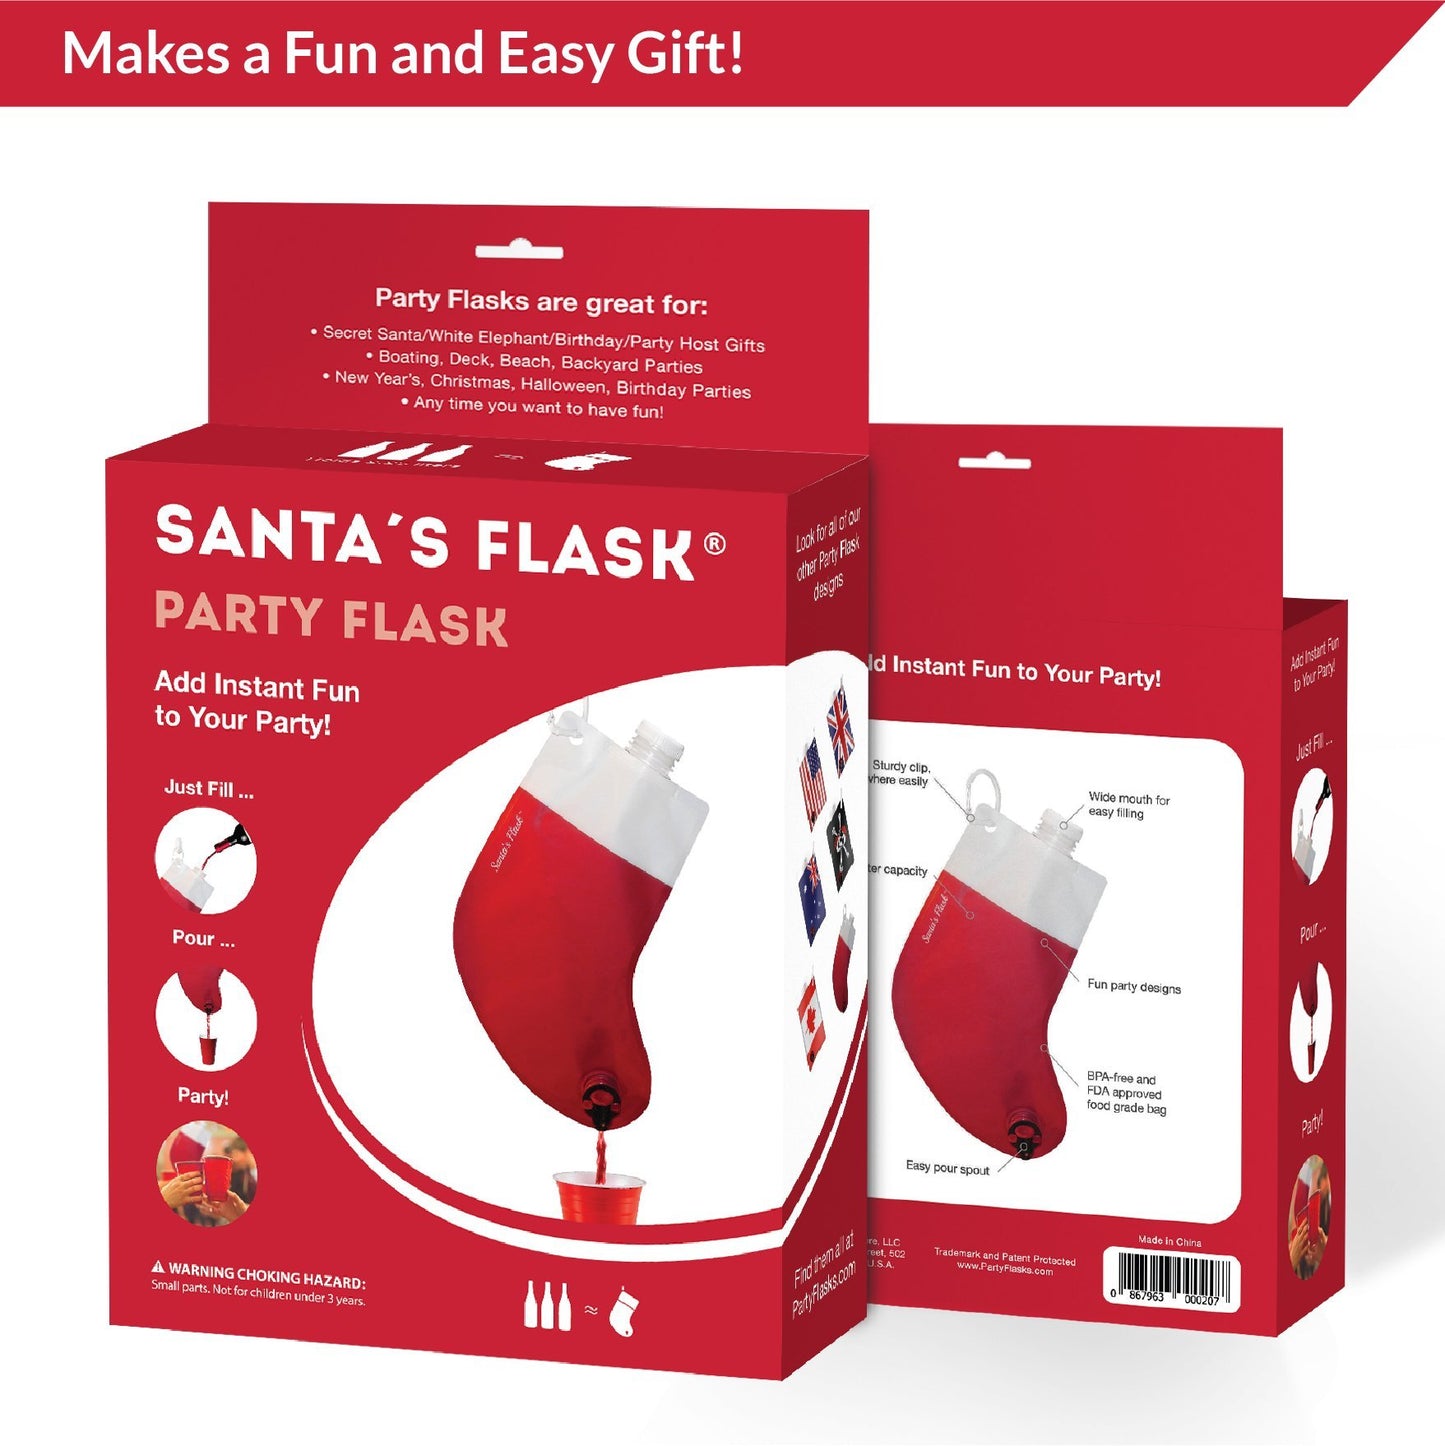 Party Flasks Santa Flask for Liquor, Wine, Drinks: Funny Gag Gifts for White Elephant Christmas Gifts Exchanges; Beverage Dispenser Holds 2.25 Liters for Holiday, Graduation, Office Parties - 2 Pack